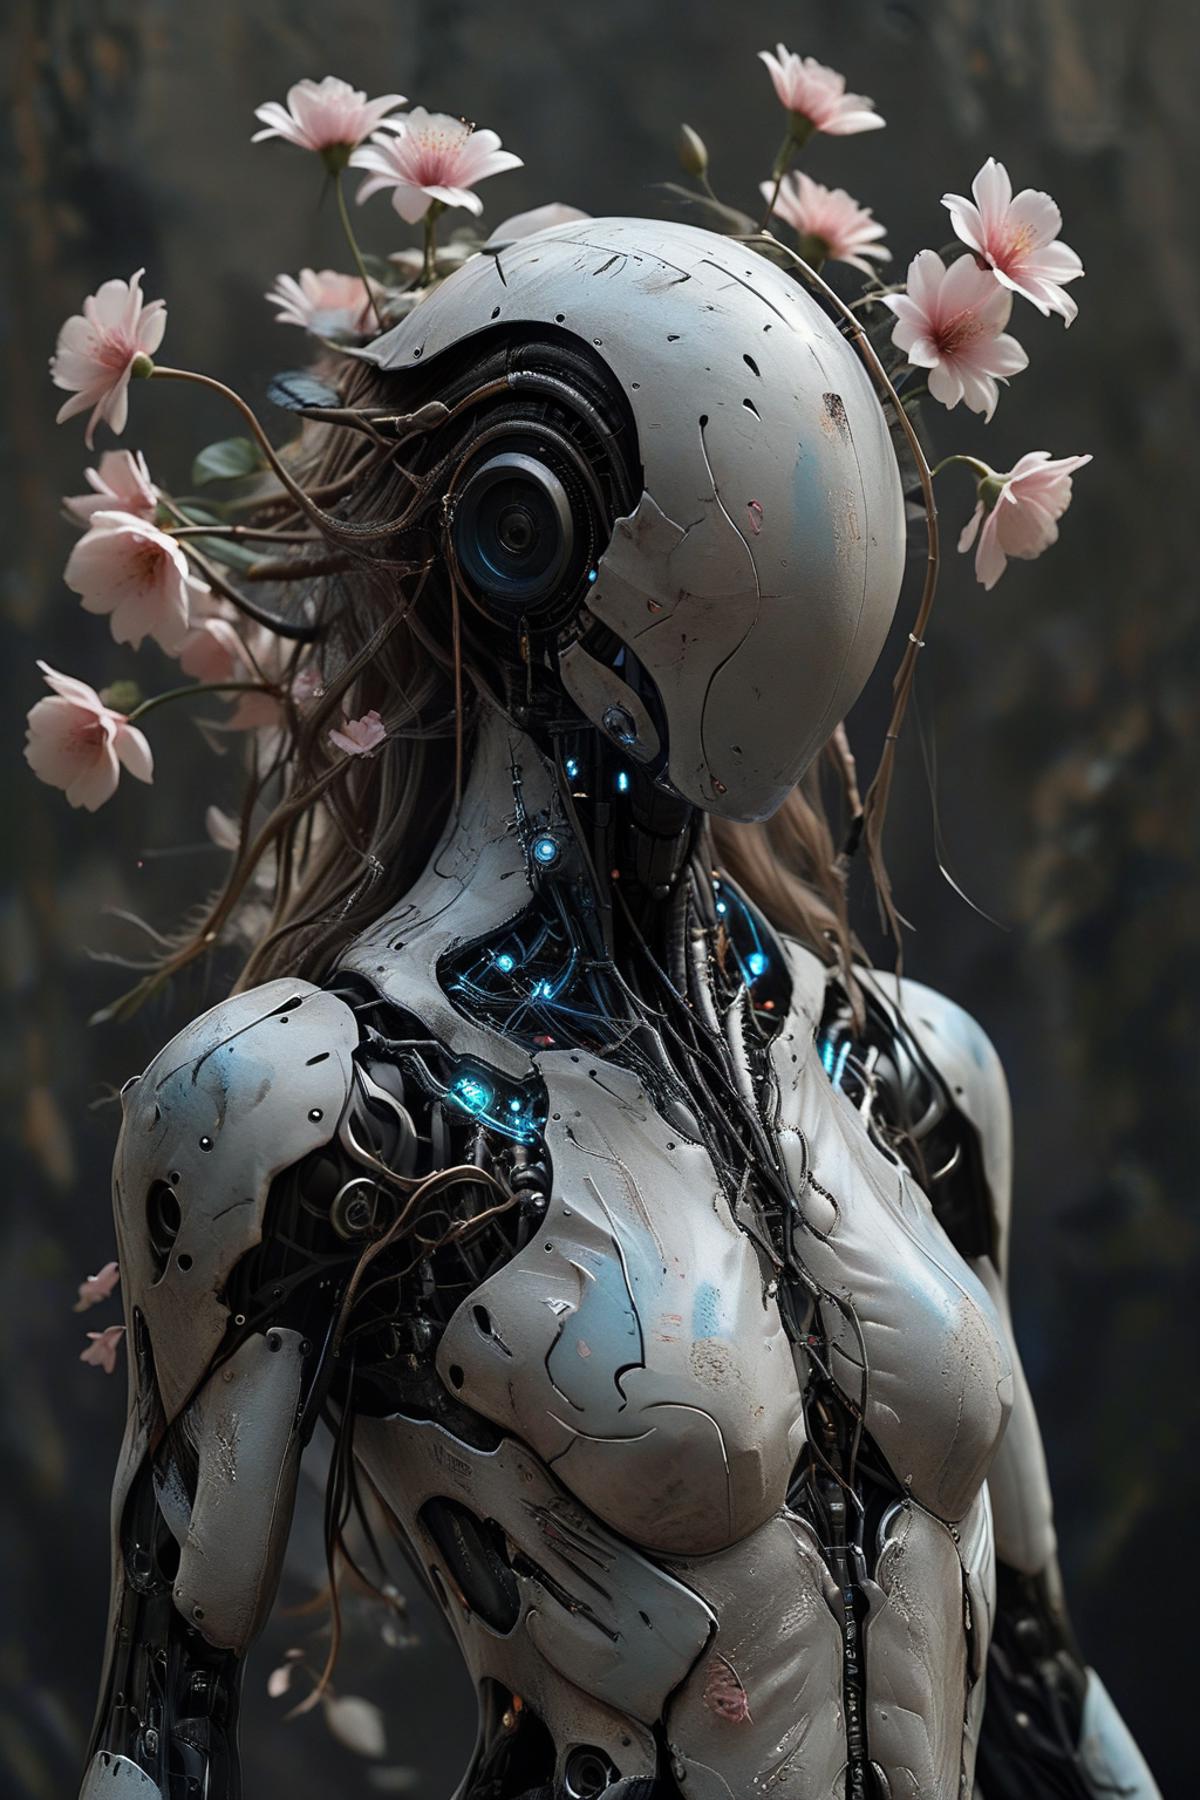 A robotic figure with a flower crown, featuring a white and silver body with blue and green accents.